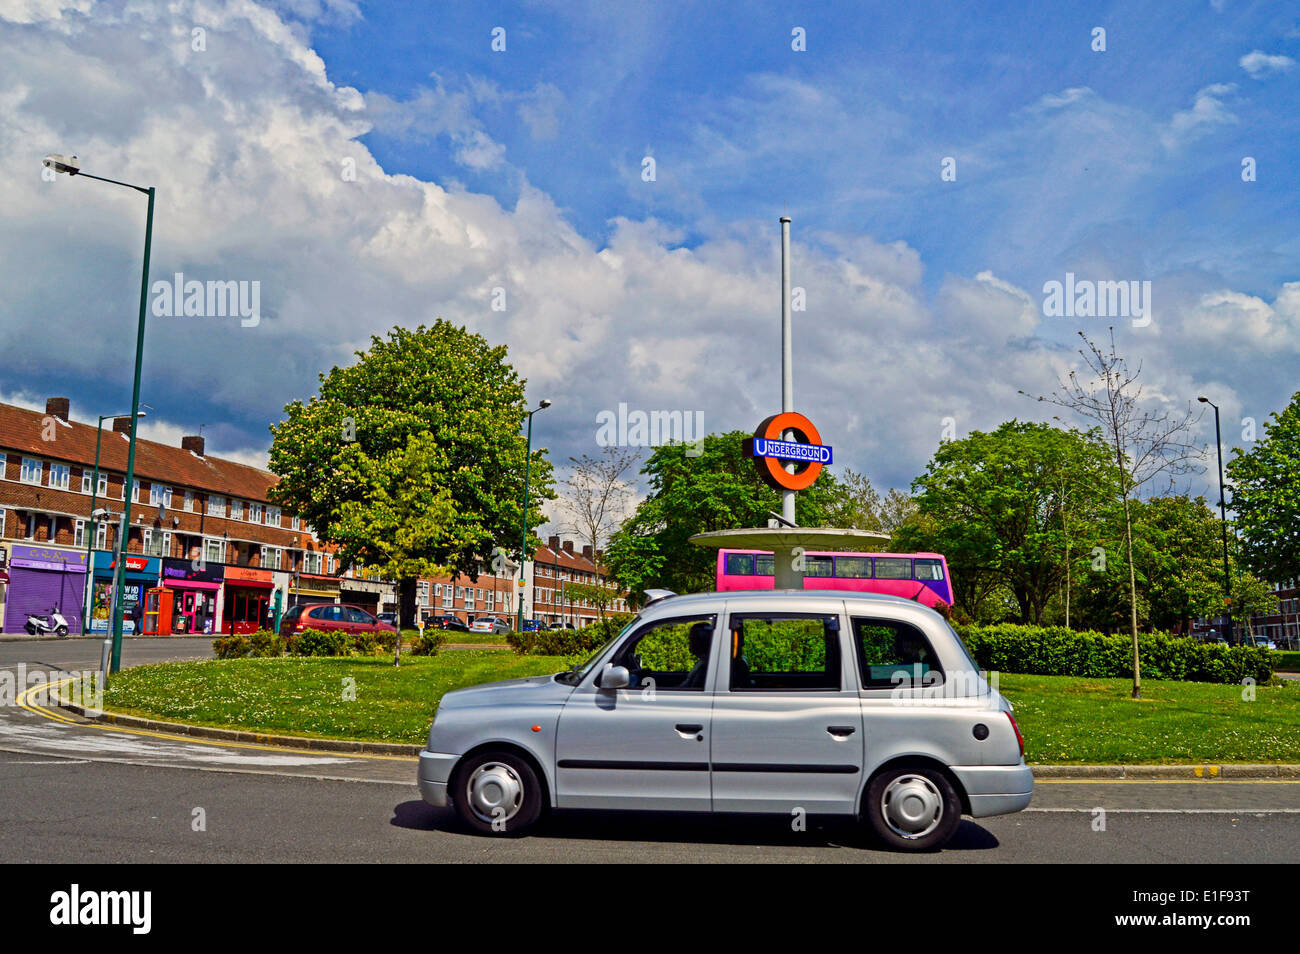 Taxi cab opposite Queensbury Underground Station, London Borough of Brent, London, England, United Kingdom Stock Photo